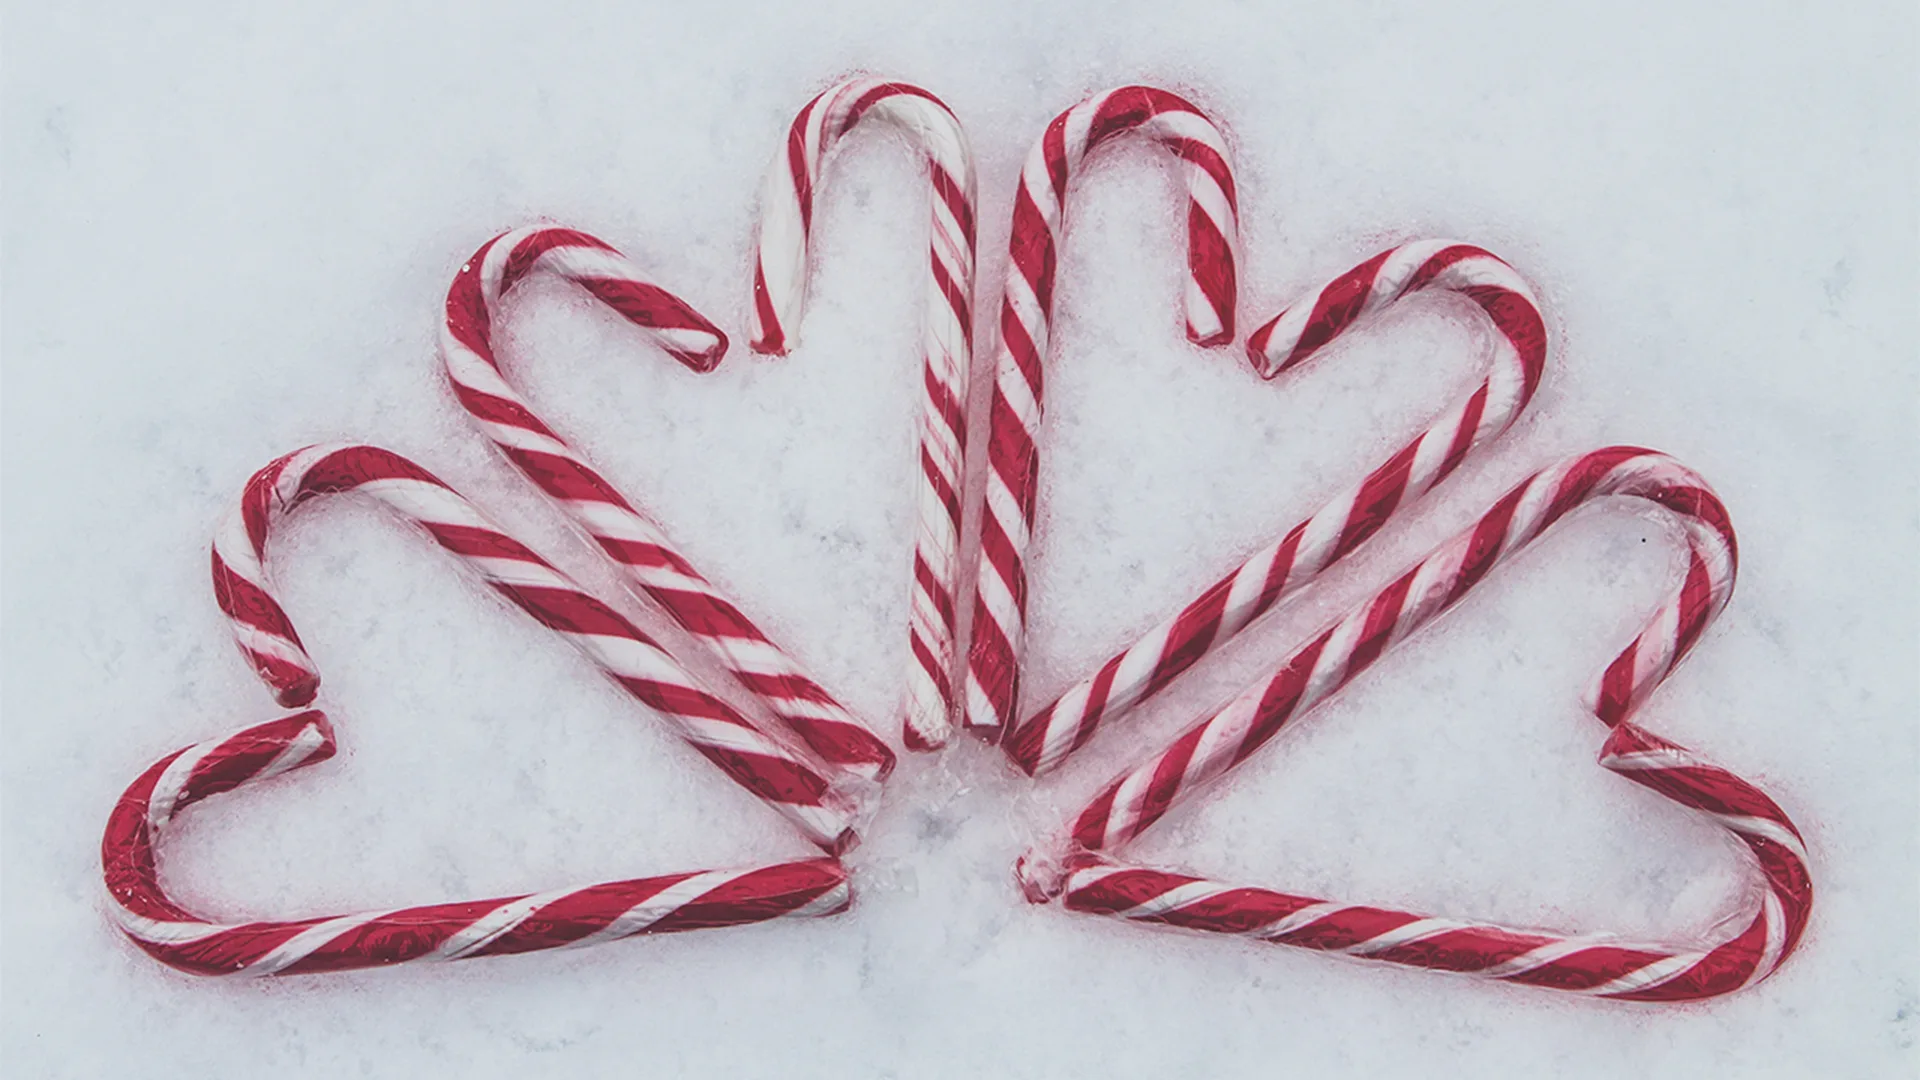 Candy canes in the shape of hearts